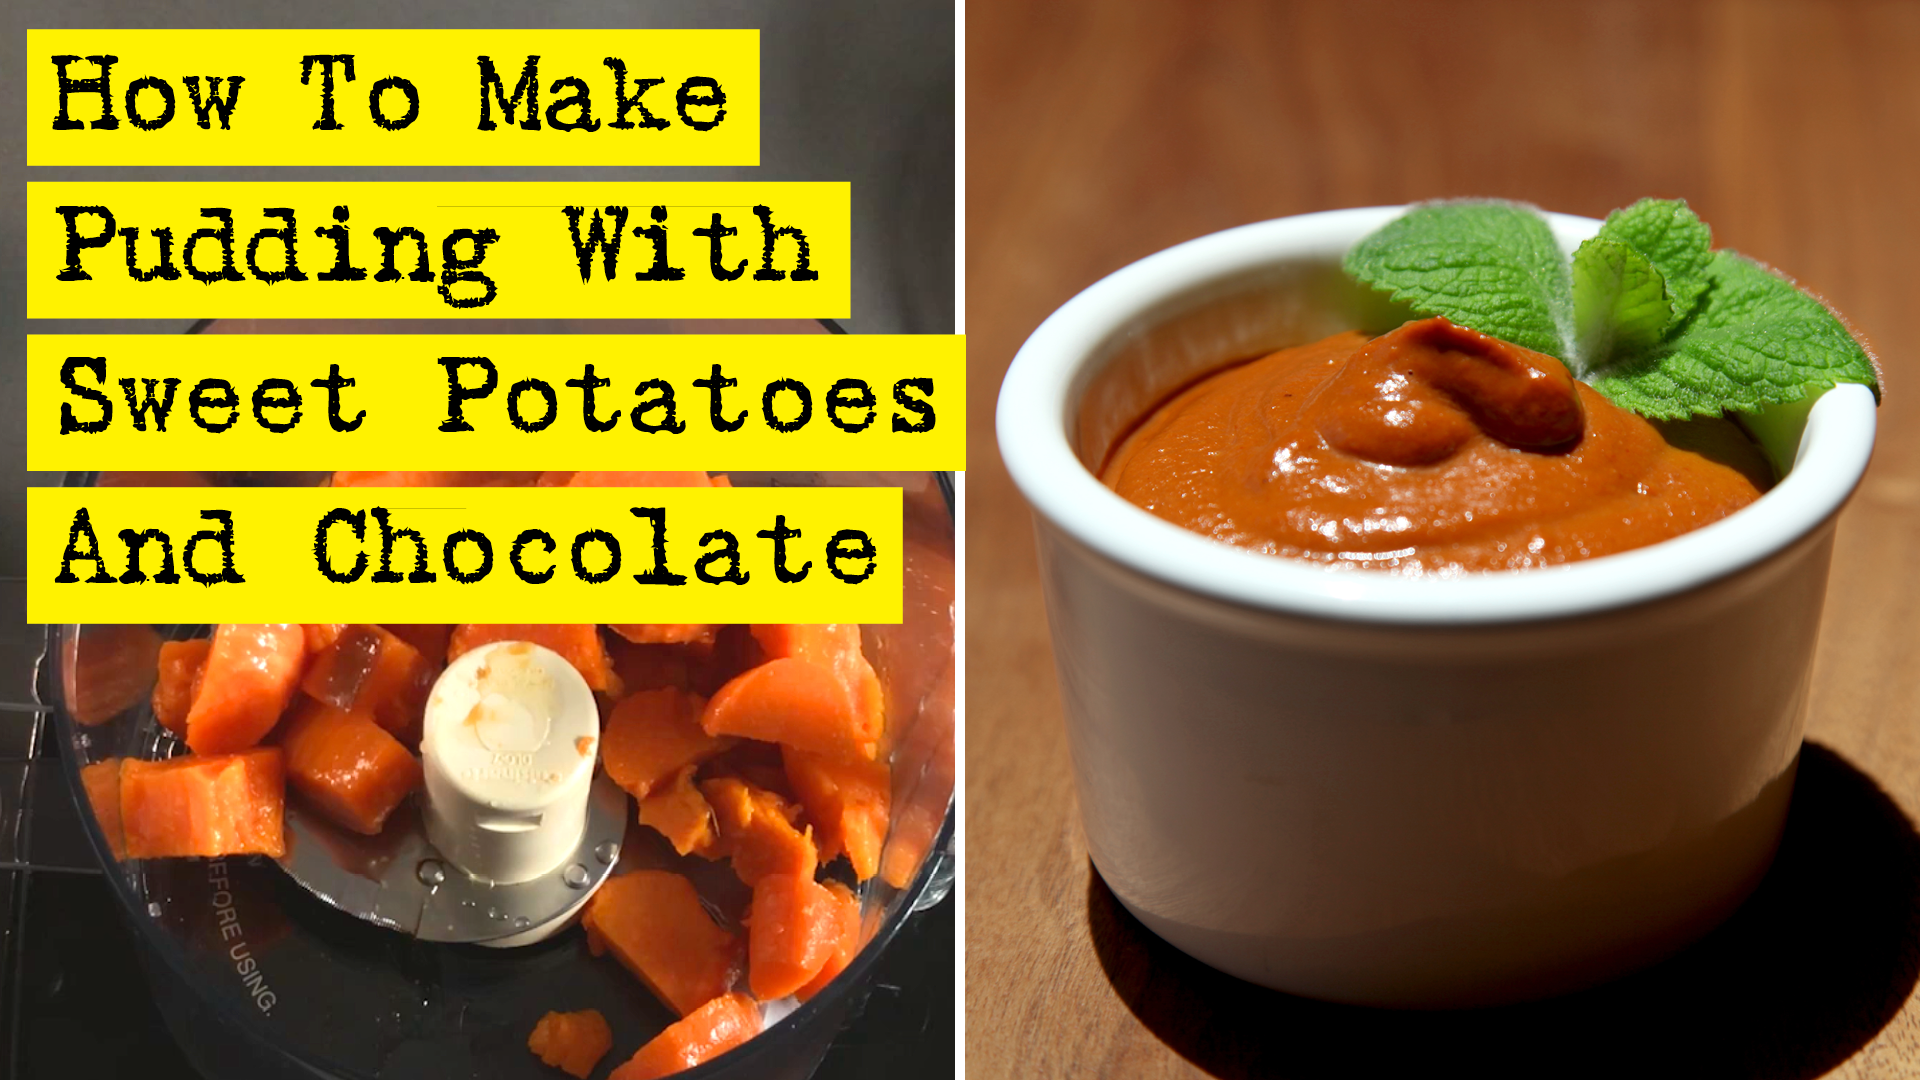 How To Make Pudding With Sweet Potatoes And Chocolate - by DIY Presto!